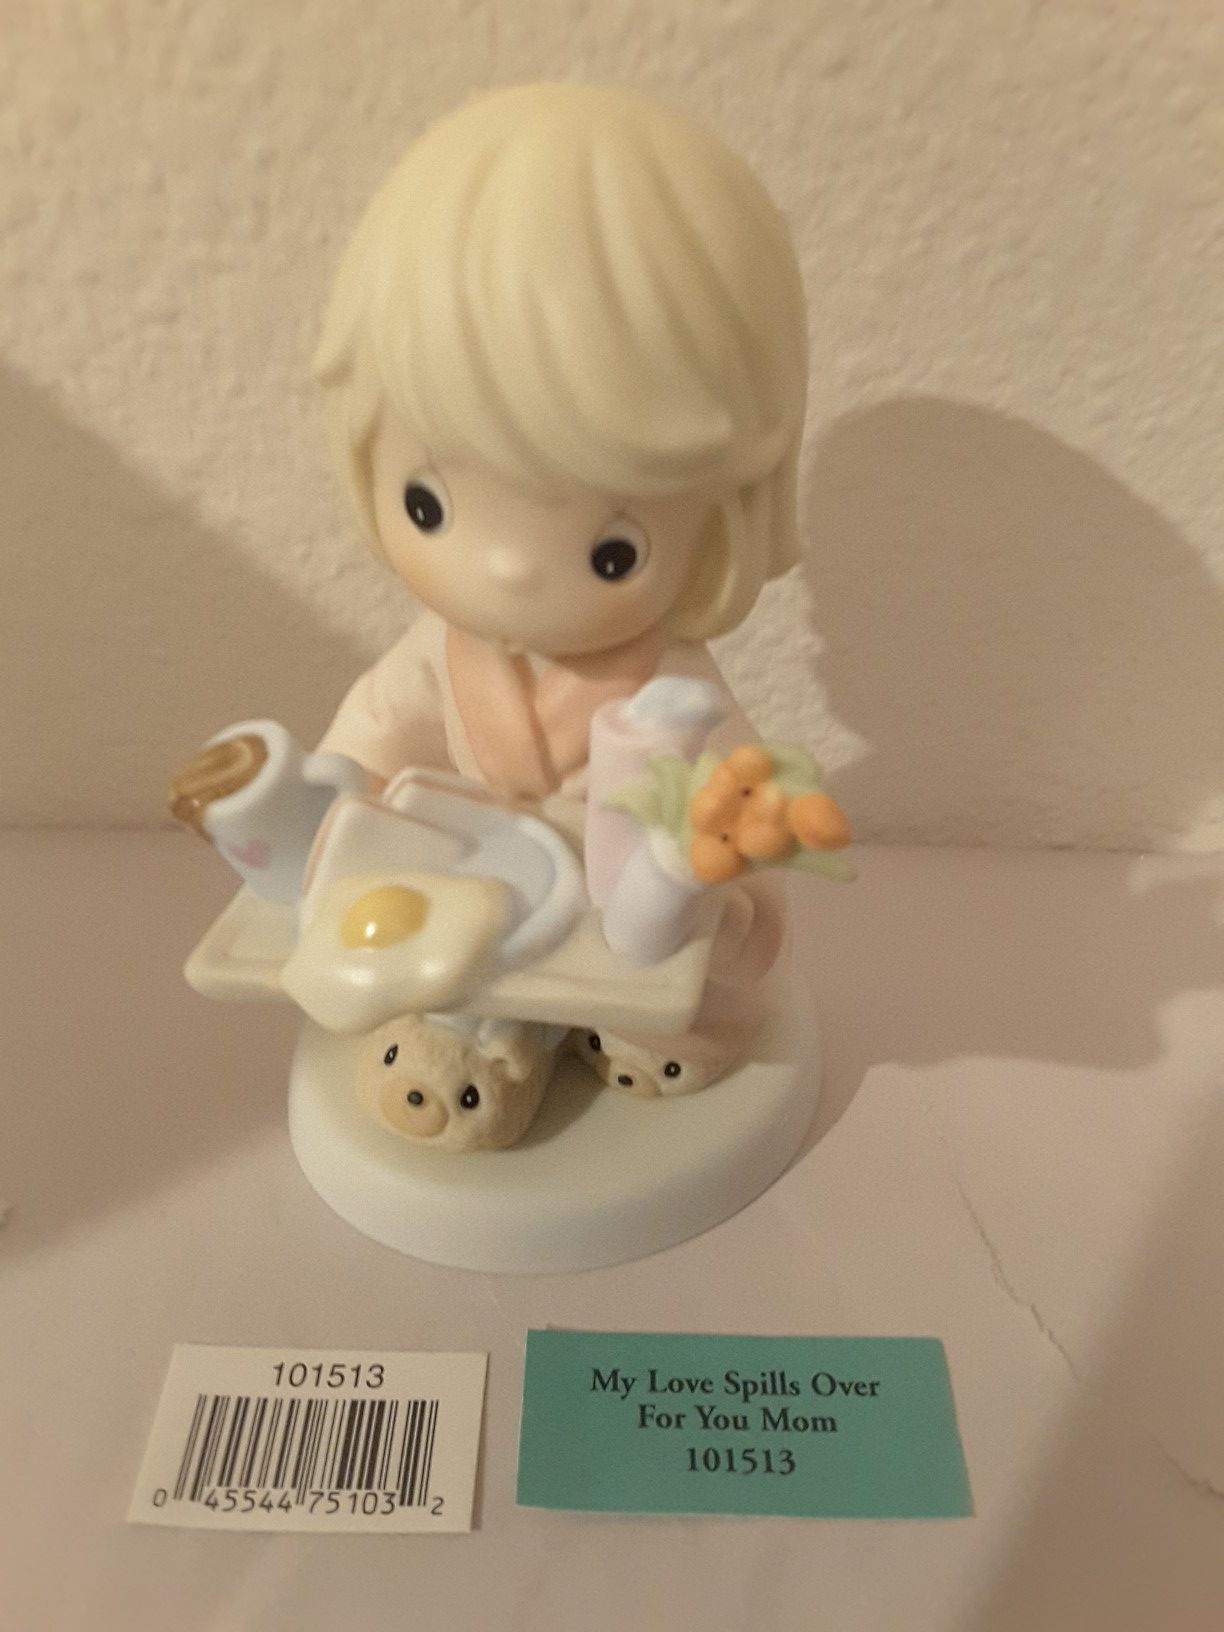 For Mom ... Birthday, Mother's Day, or just because Themed Precious Moments Porcelain Figurines.